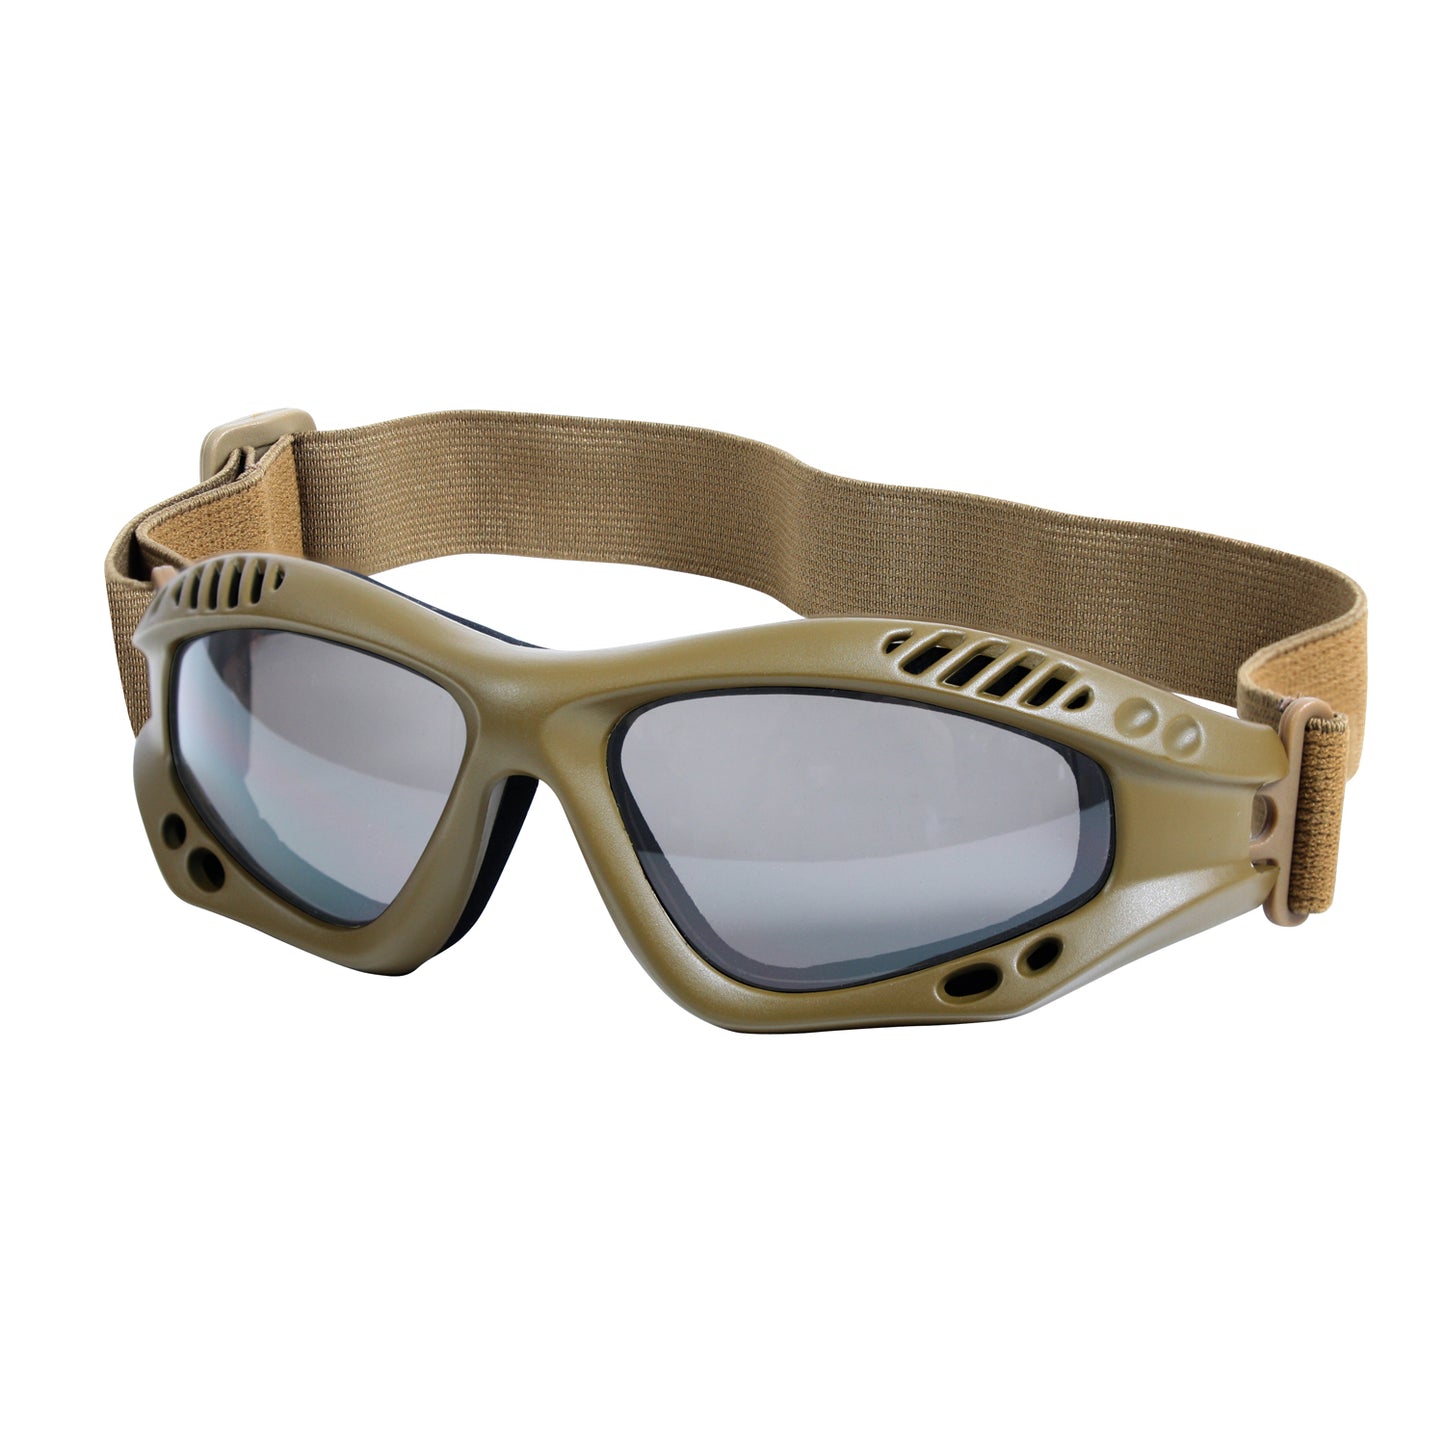 ROTHCO Ventec 戰術護目鏡 Tactical Goggles